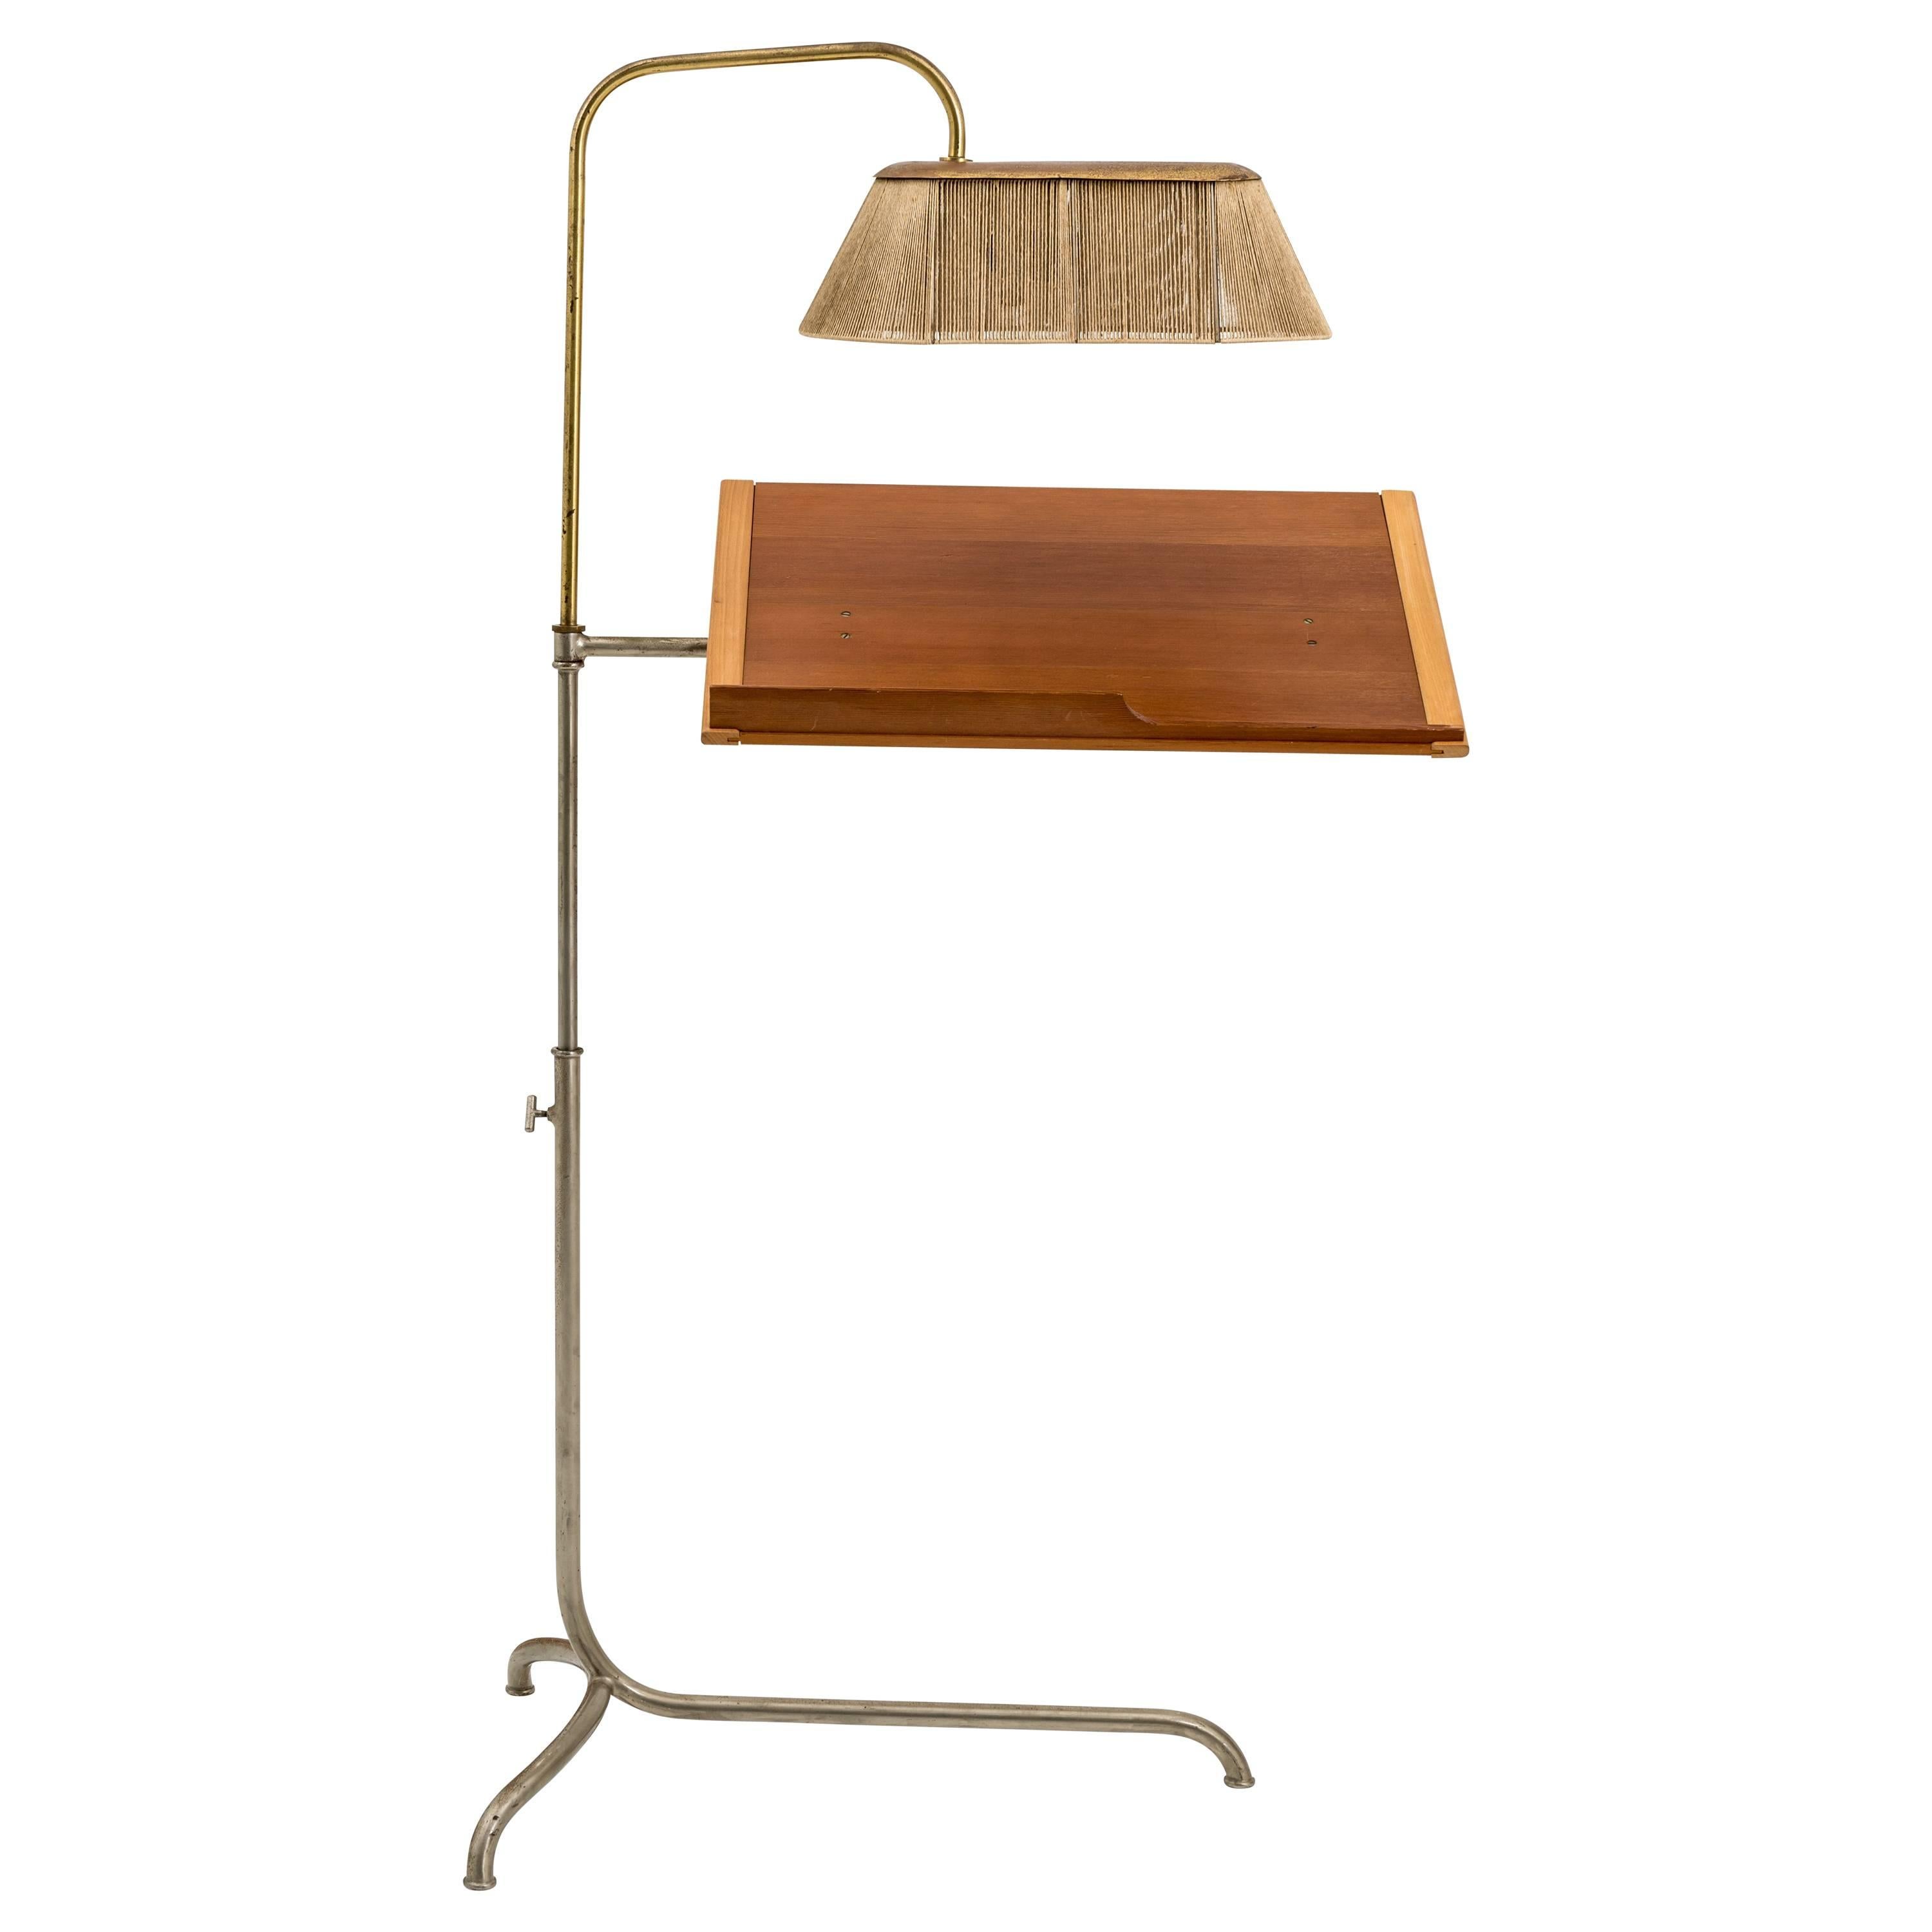 Very Rare Reading Stand with Light by Bruno Mathsson